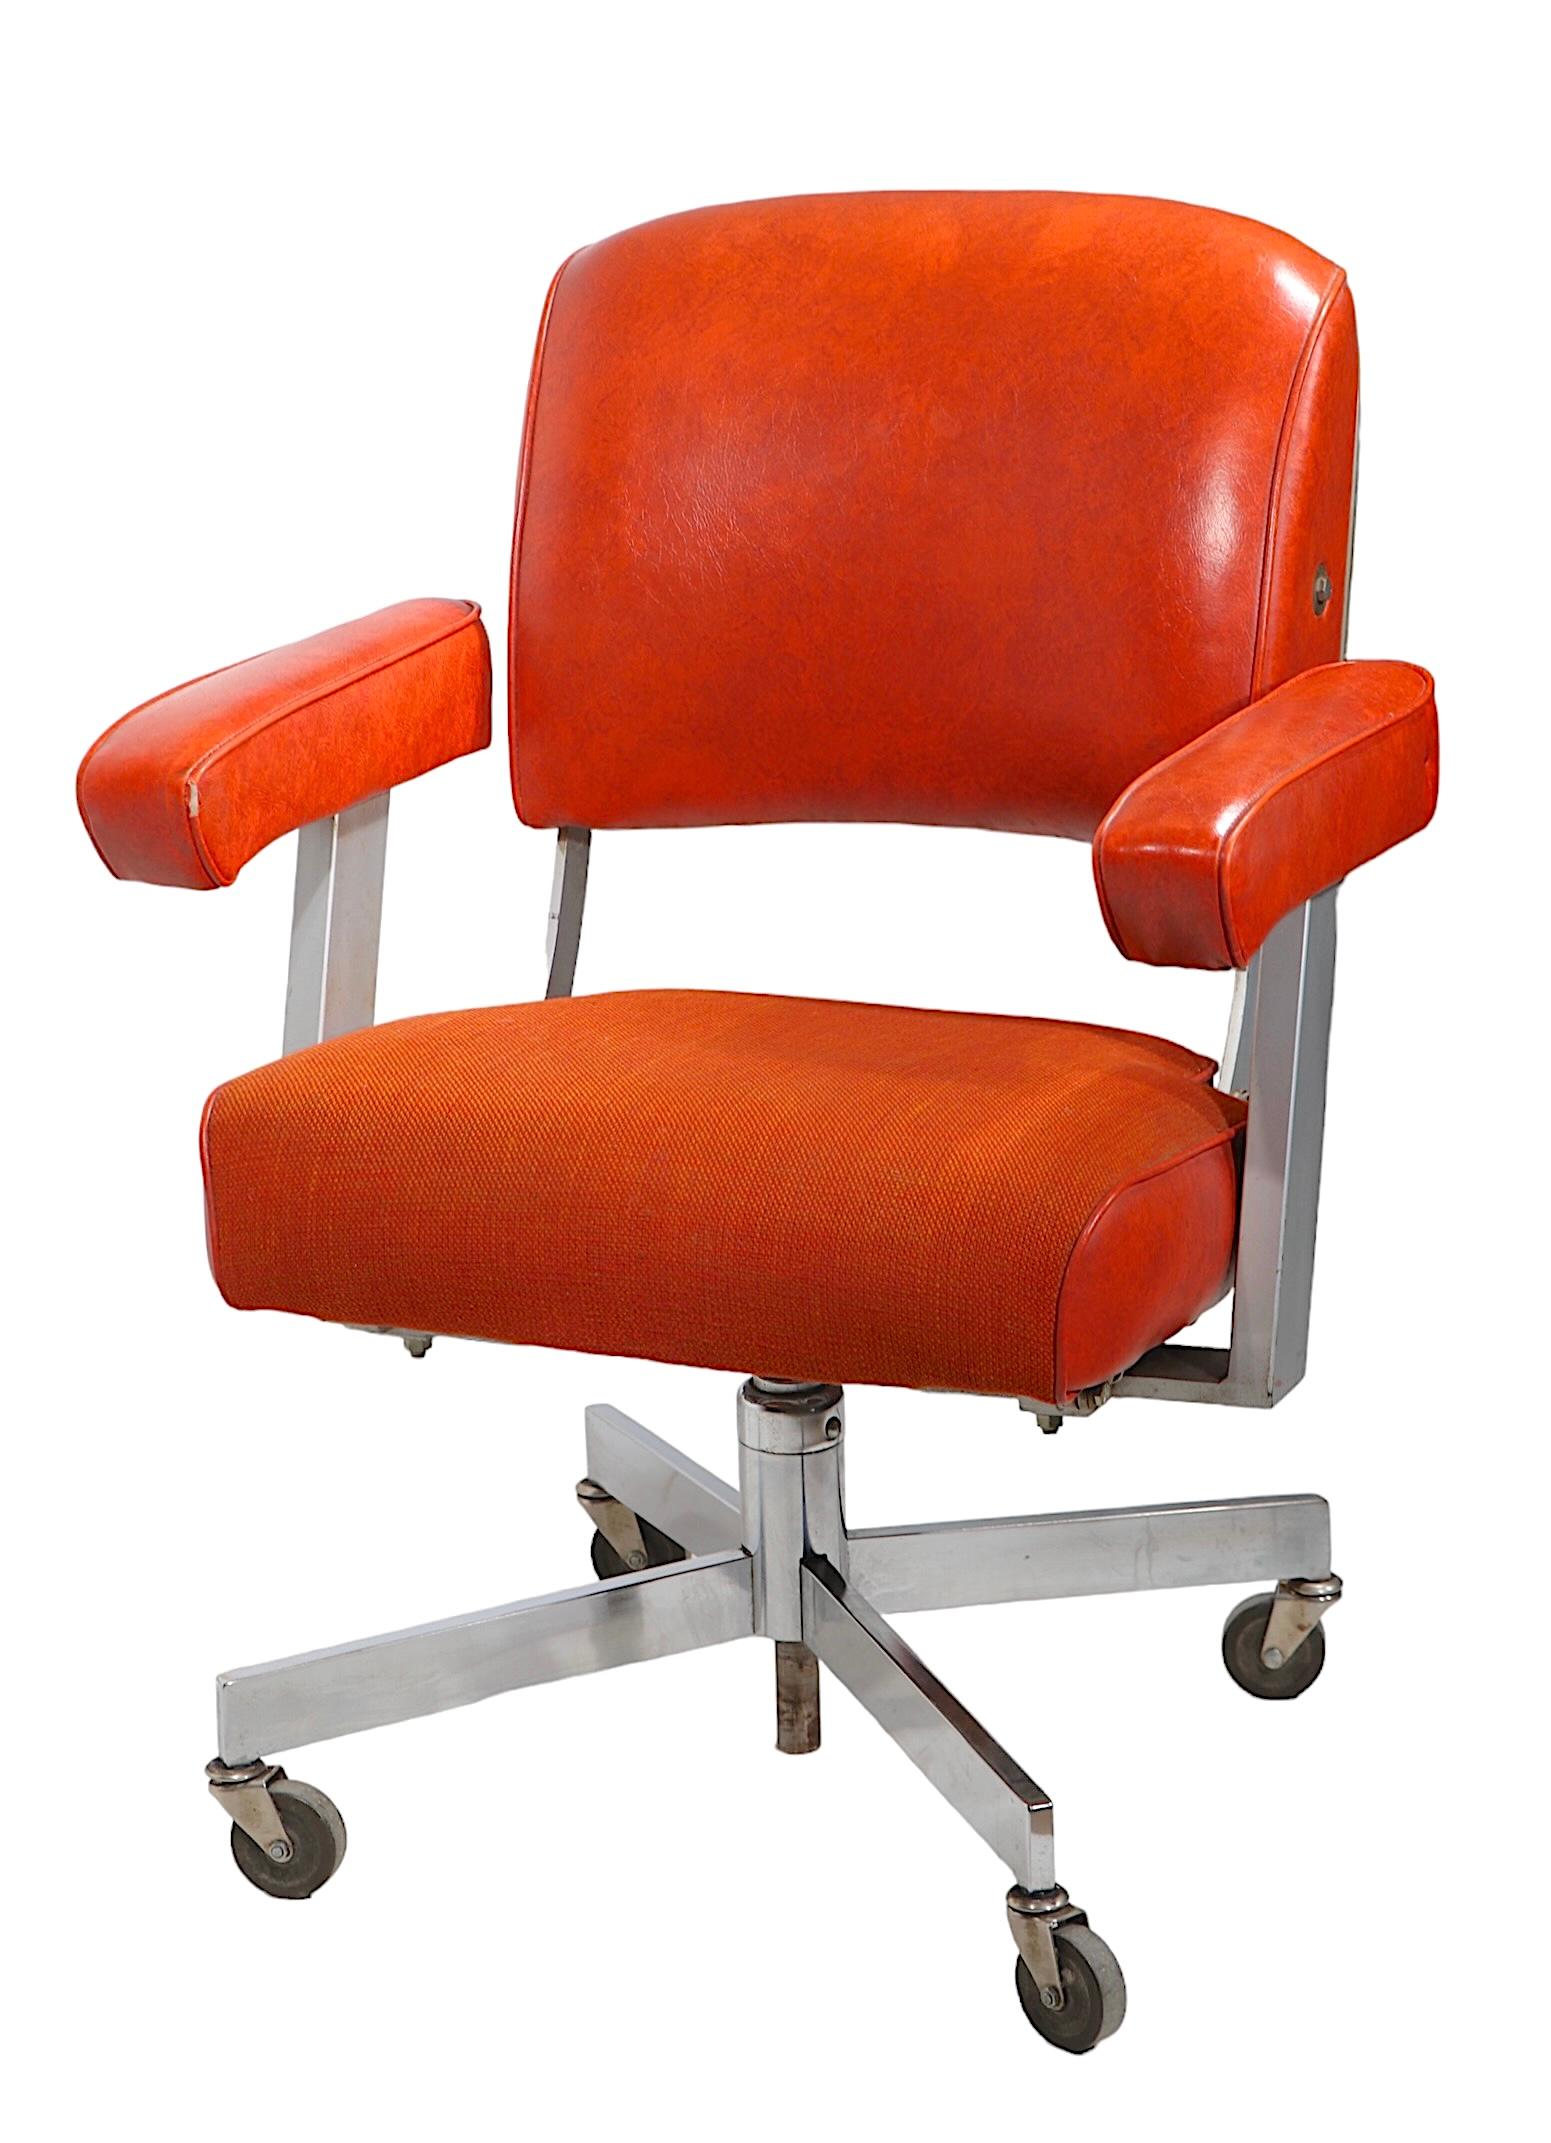 American Executive Model DoMore Swivel Desk Office Chair Model 616 c 1950/1960's  For Sale